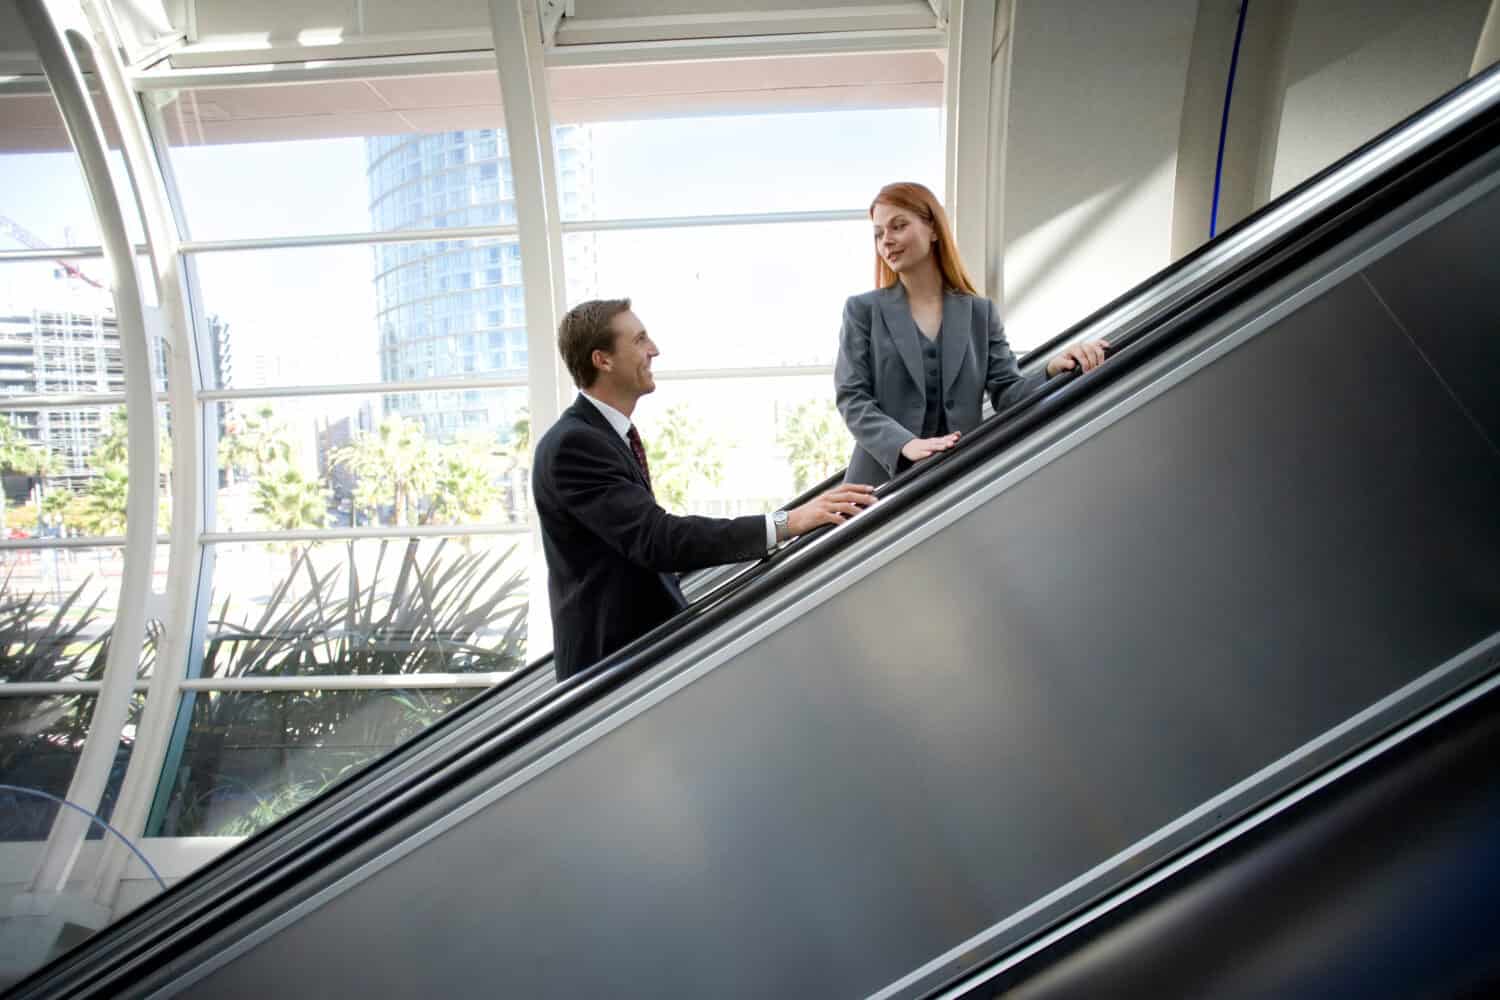 Horizontal profile shot of a businessman and businesswoman smiling at each other on an escalator going up in a building.